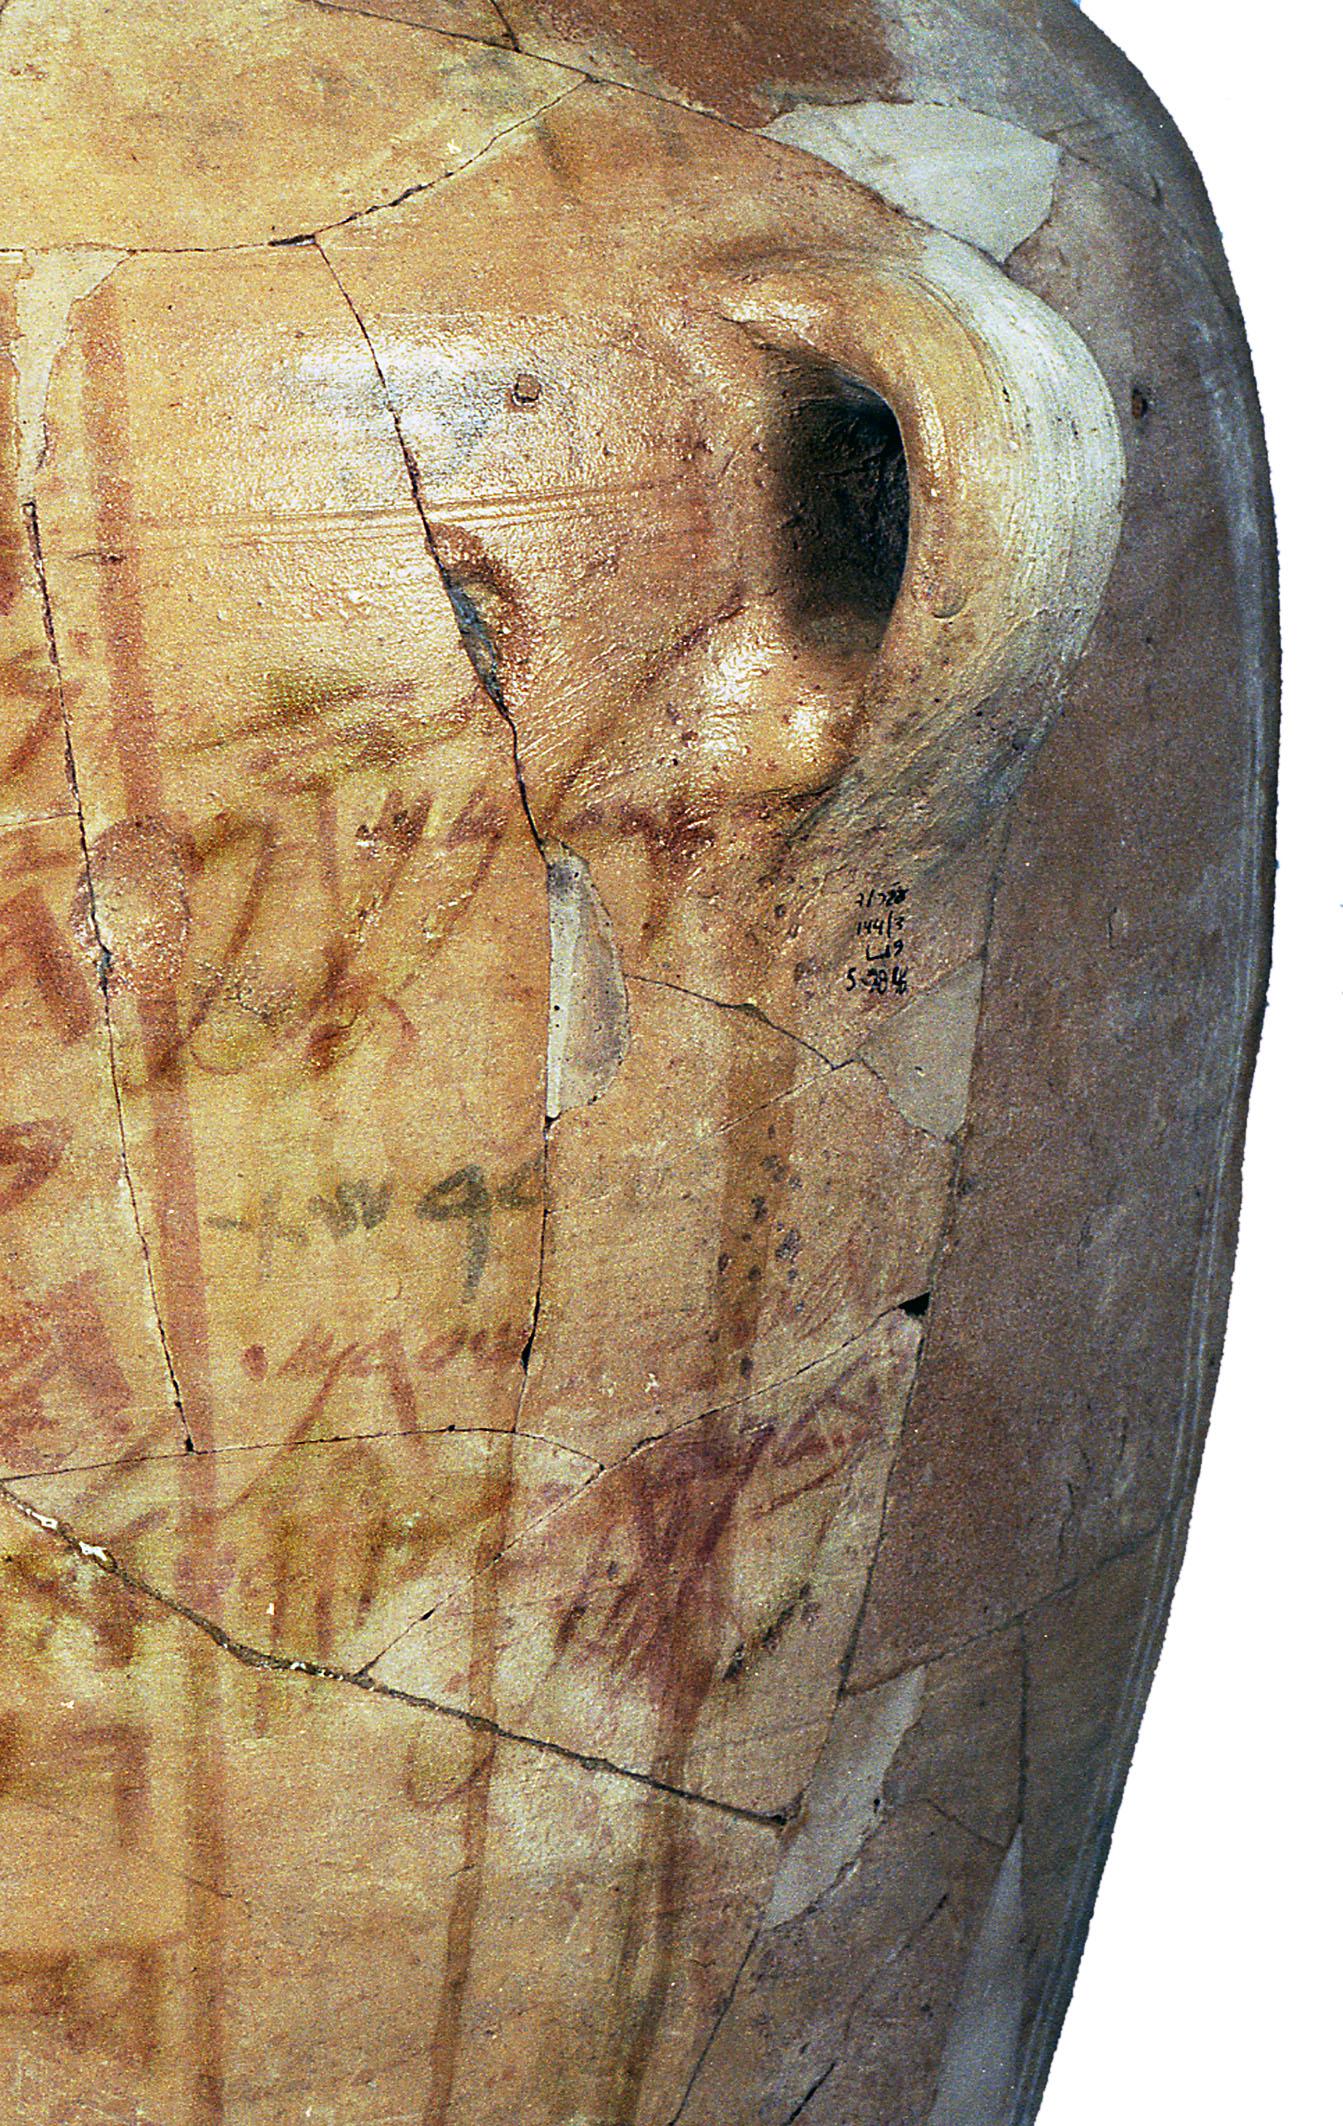 Jar with handle and inscribed with Hebrew letters.